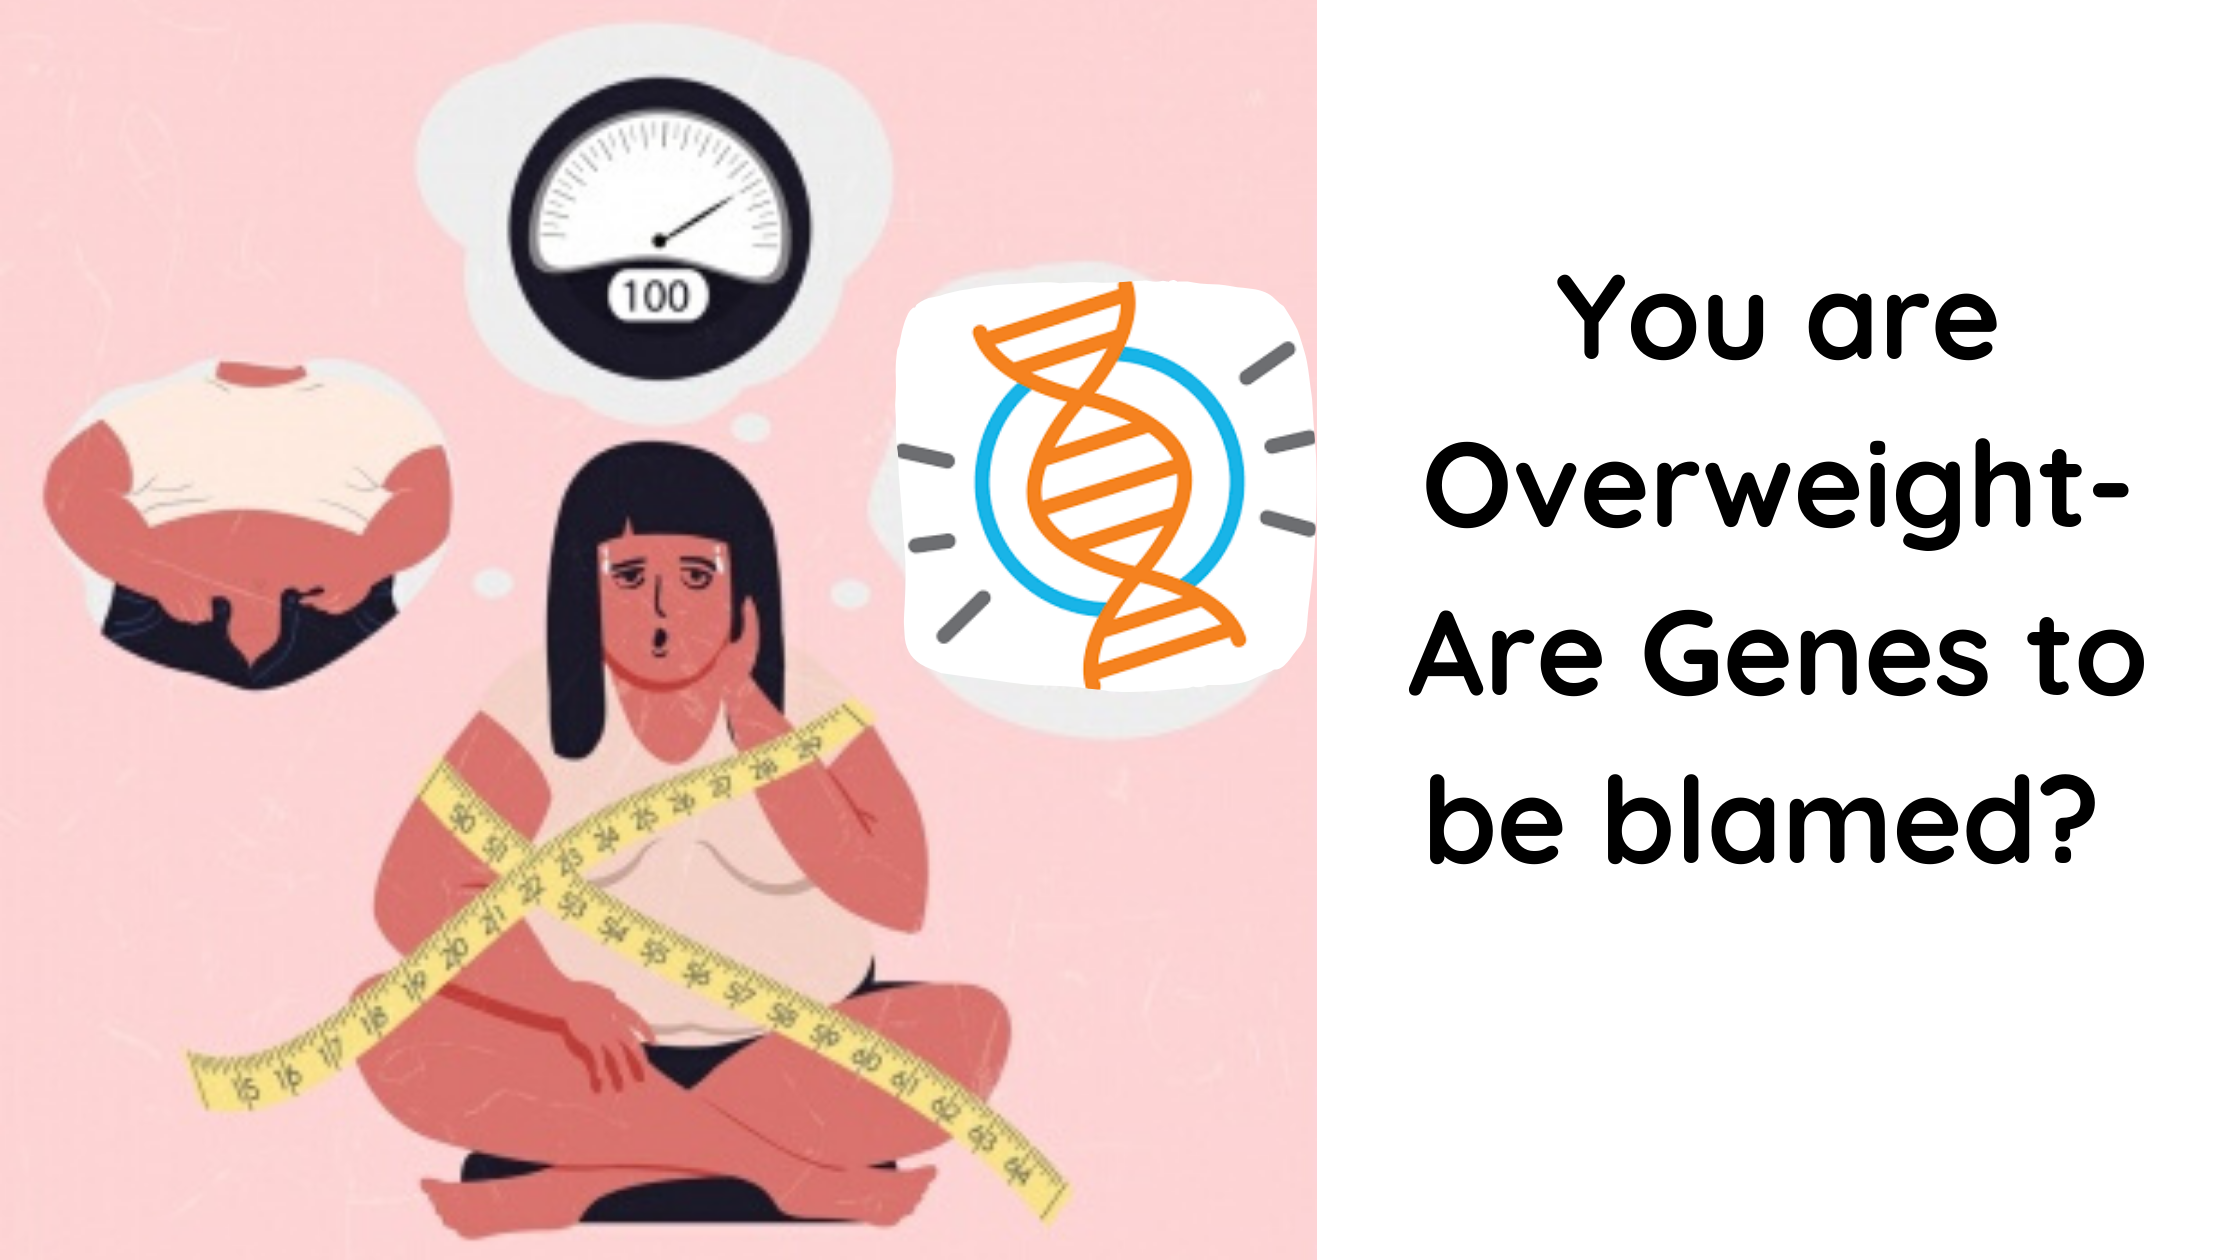 You are overweight- Are Genes to be blamed?